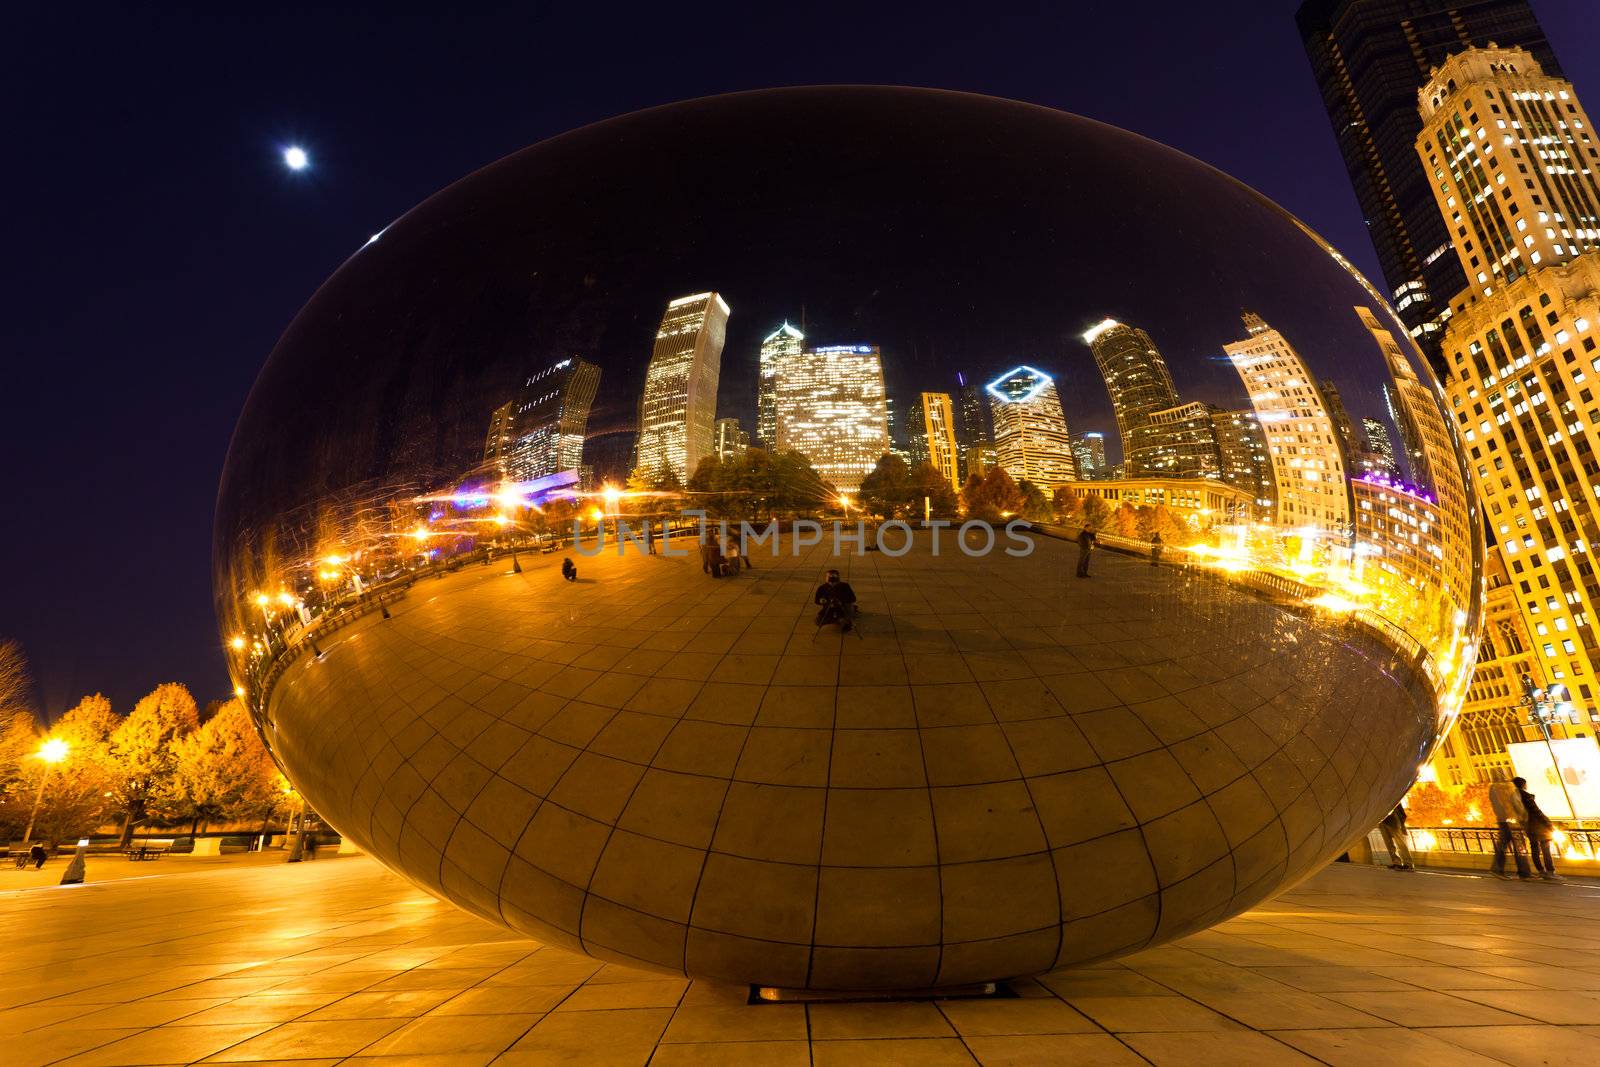 The Millennium Park in downtown Chicago by gary718